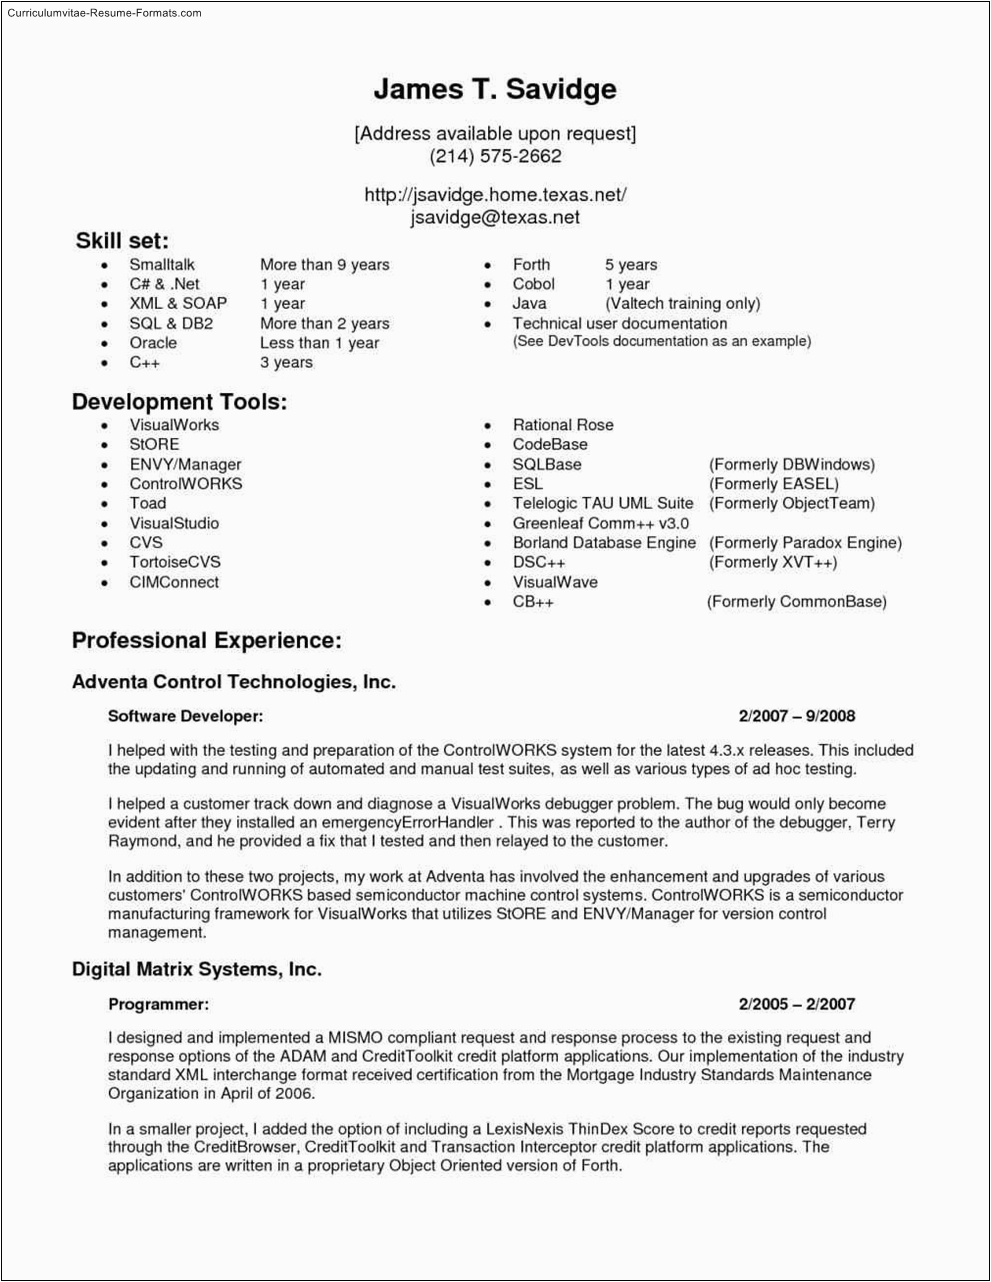 Sample Resume format for Experienced Person Experienced Resume Templates